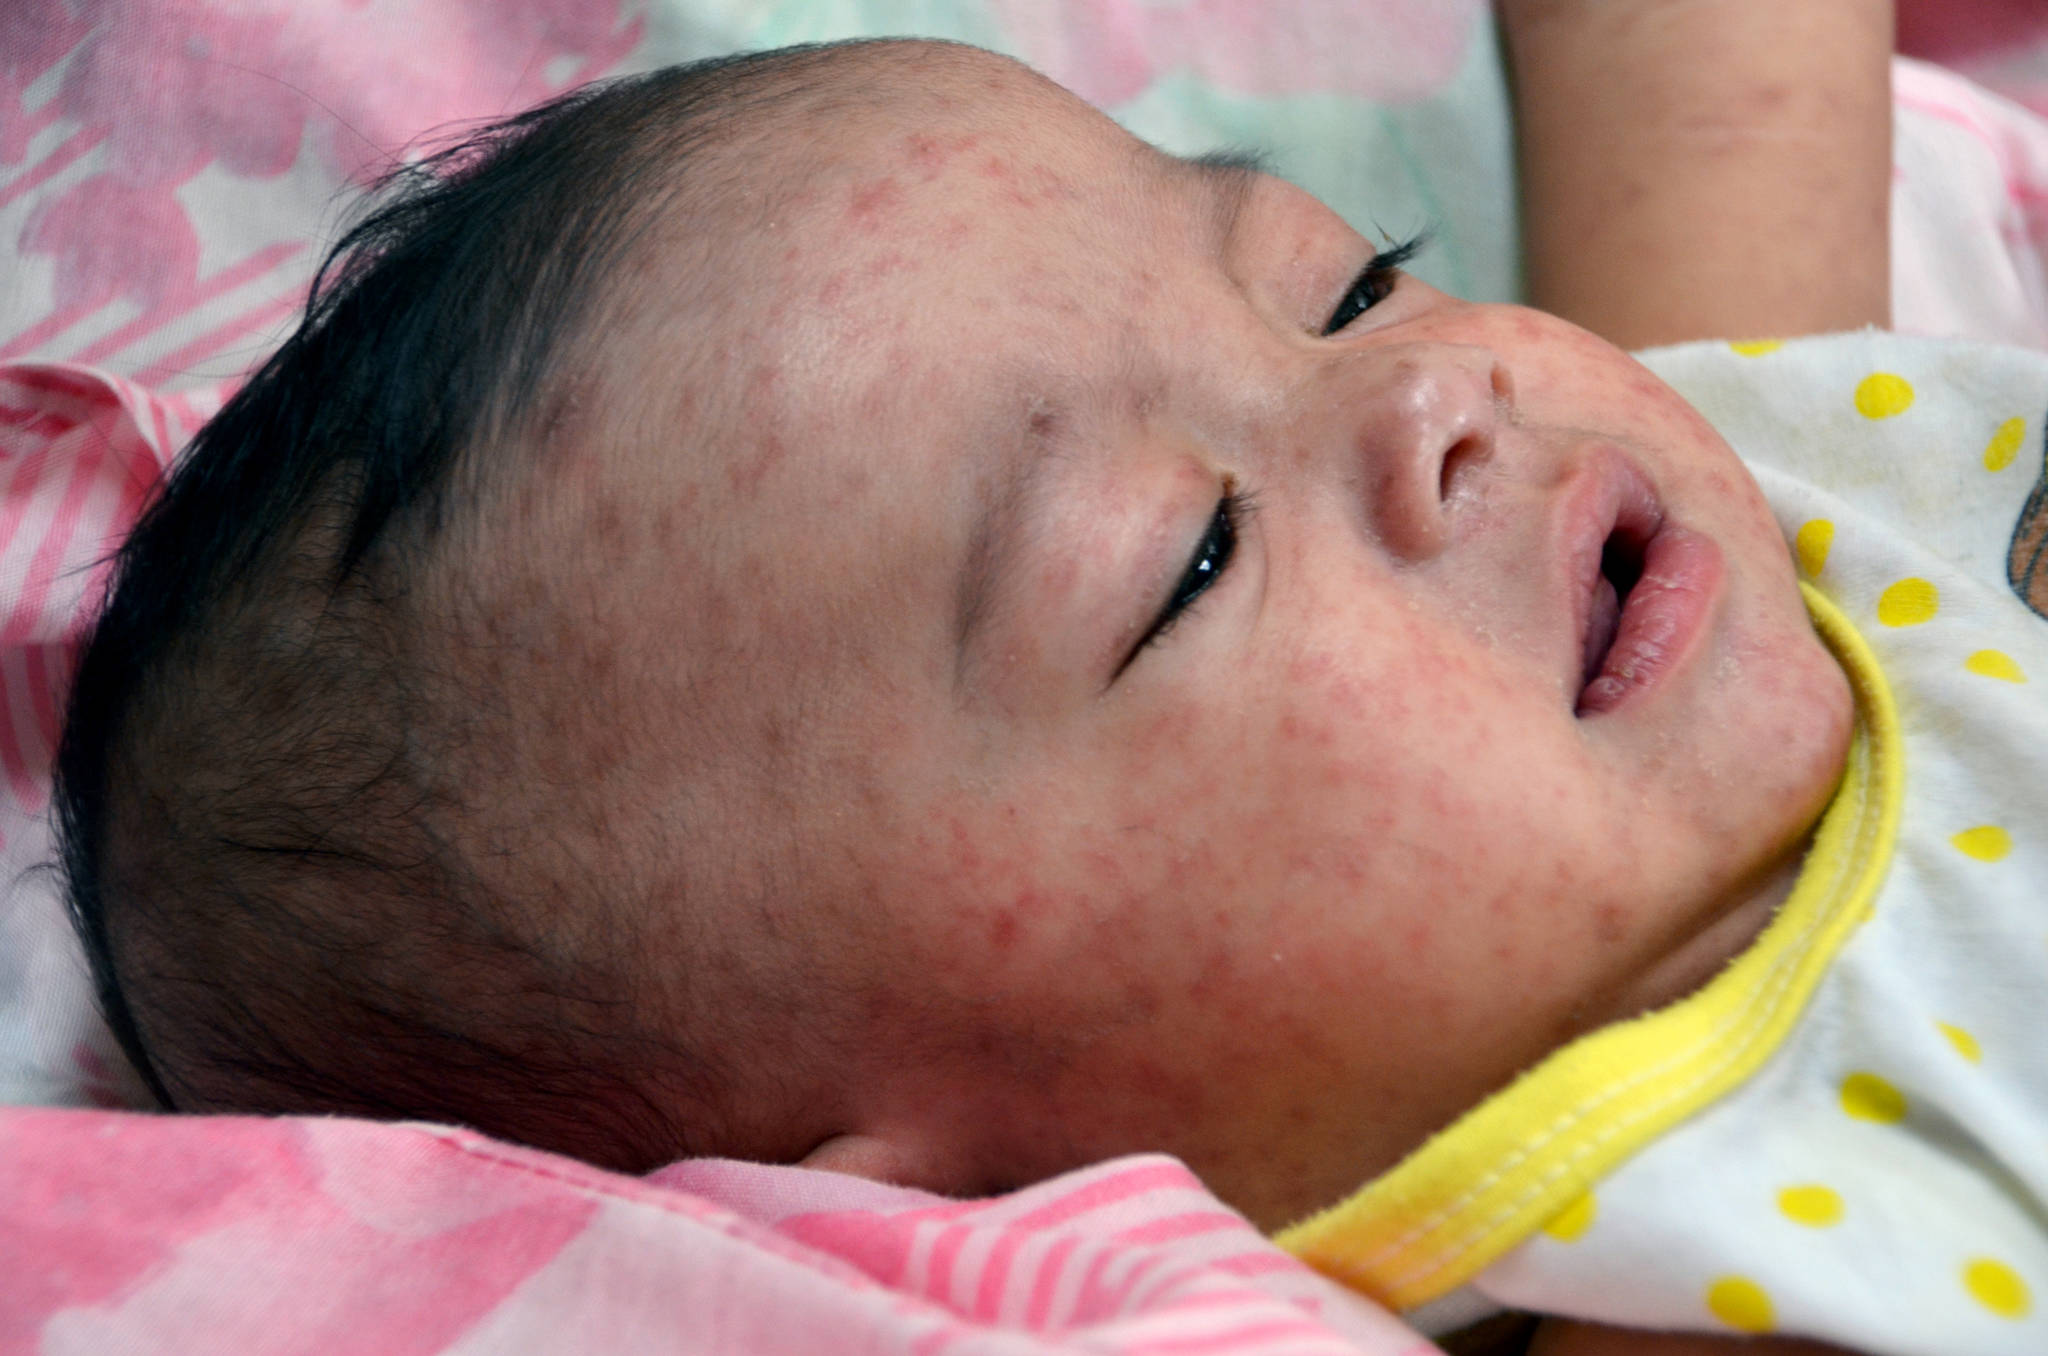 Jim Goodson photo/Centers for Disease Control                                A baby in the Philippines suffers from measles in a 2014 outbreak.